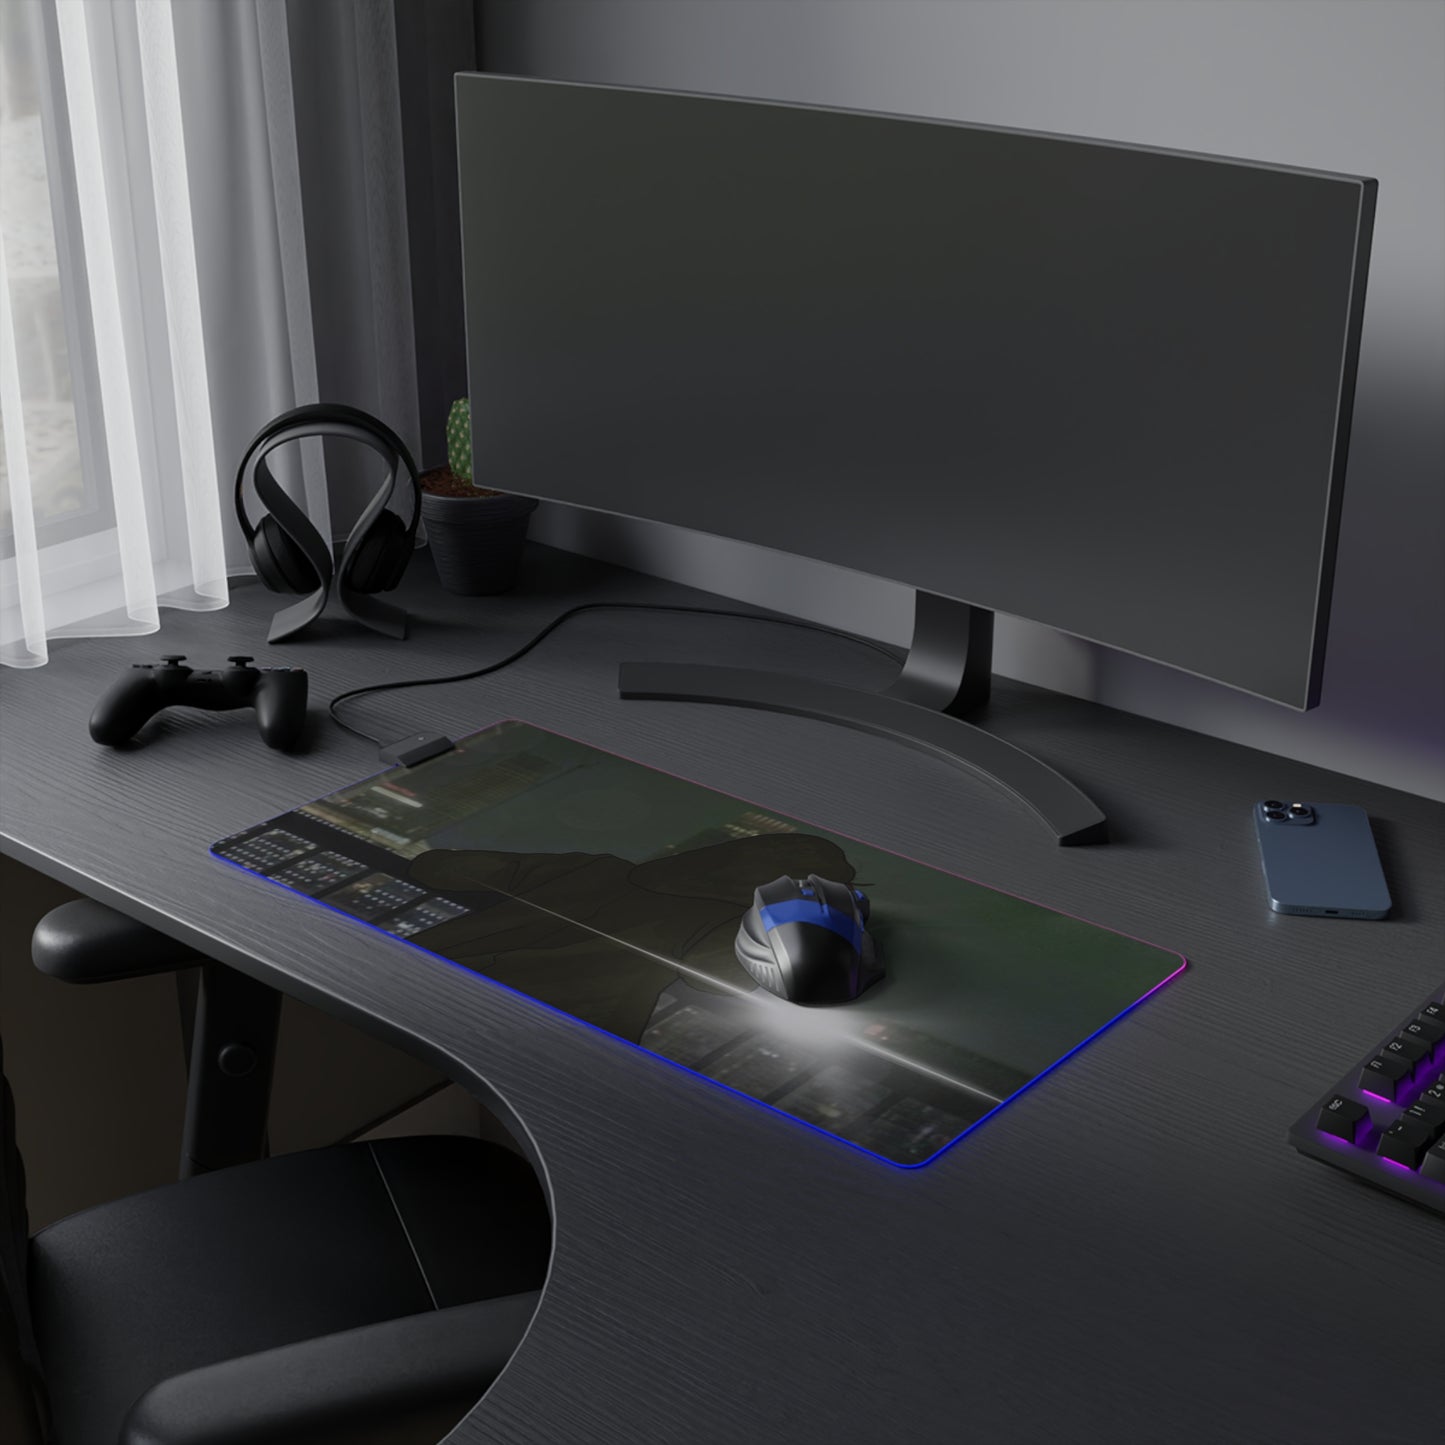 “Thoughts at midnight” LED Gaming Mouse Pad